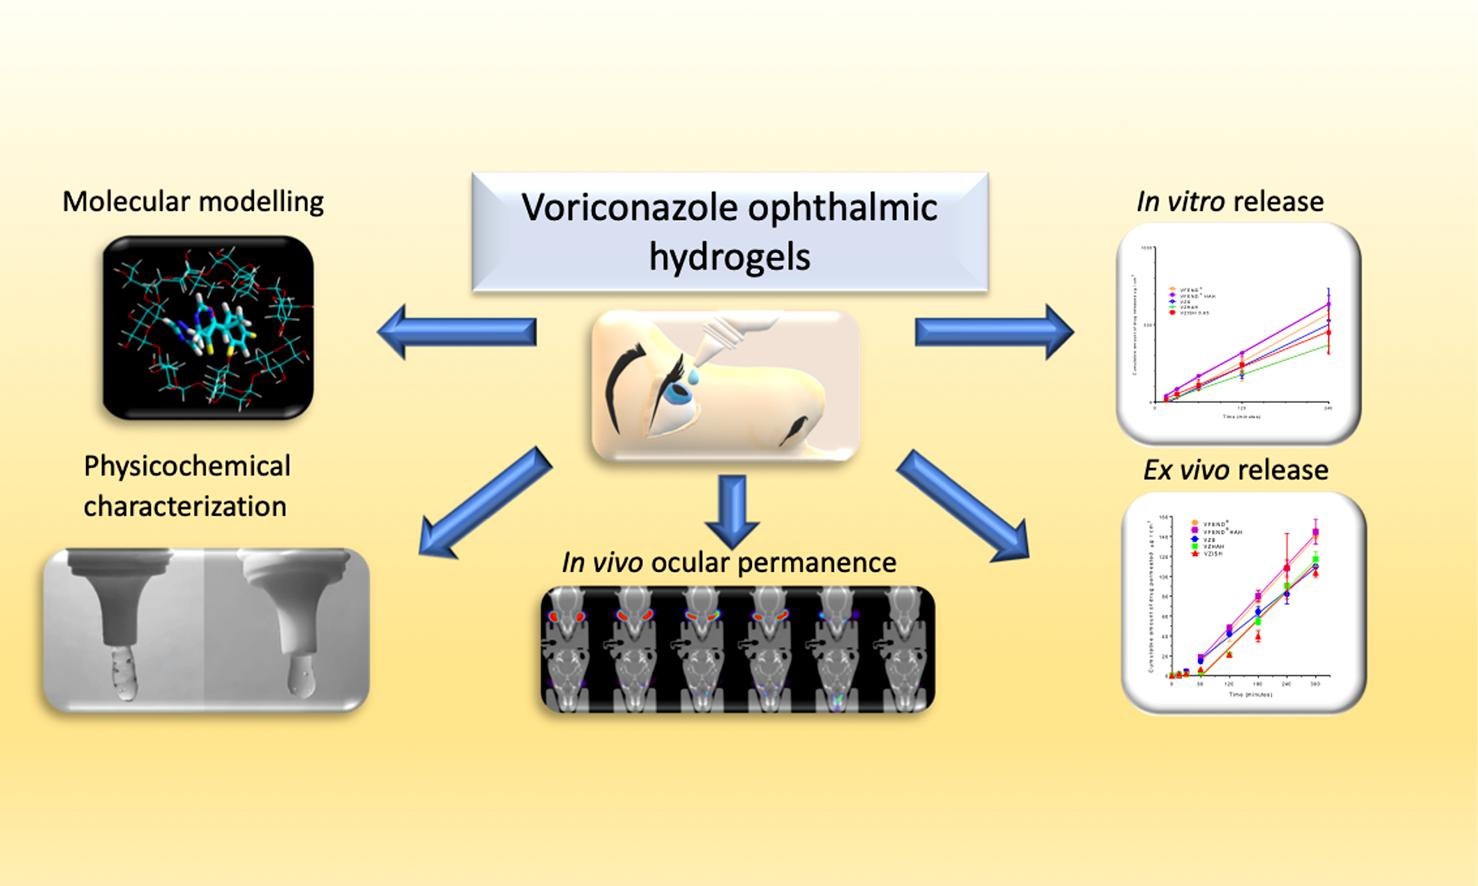 In situ forming and mucoadhesive ophthalmic voriconazole/HPβCD hydrogels for the treatment of fungal keratitis